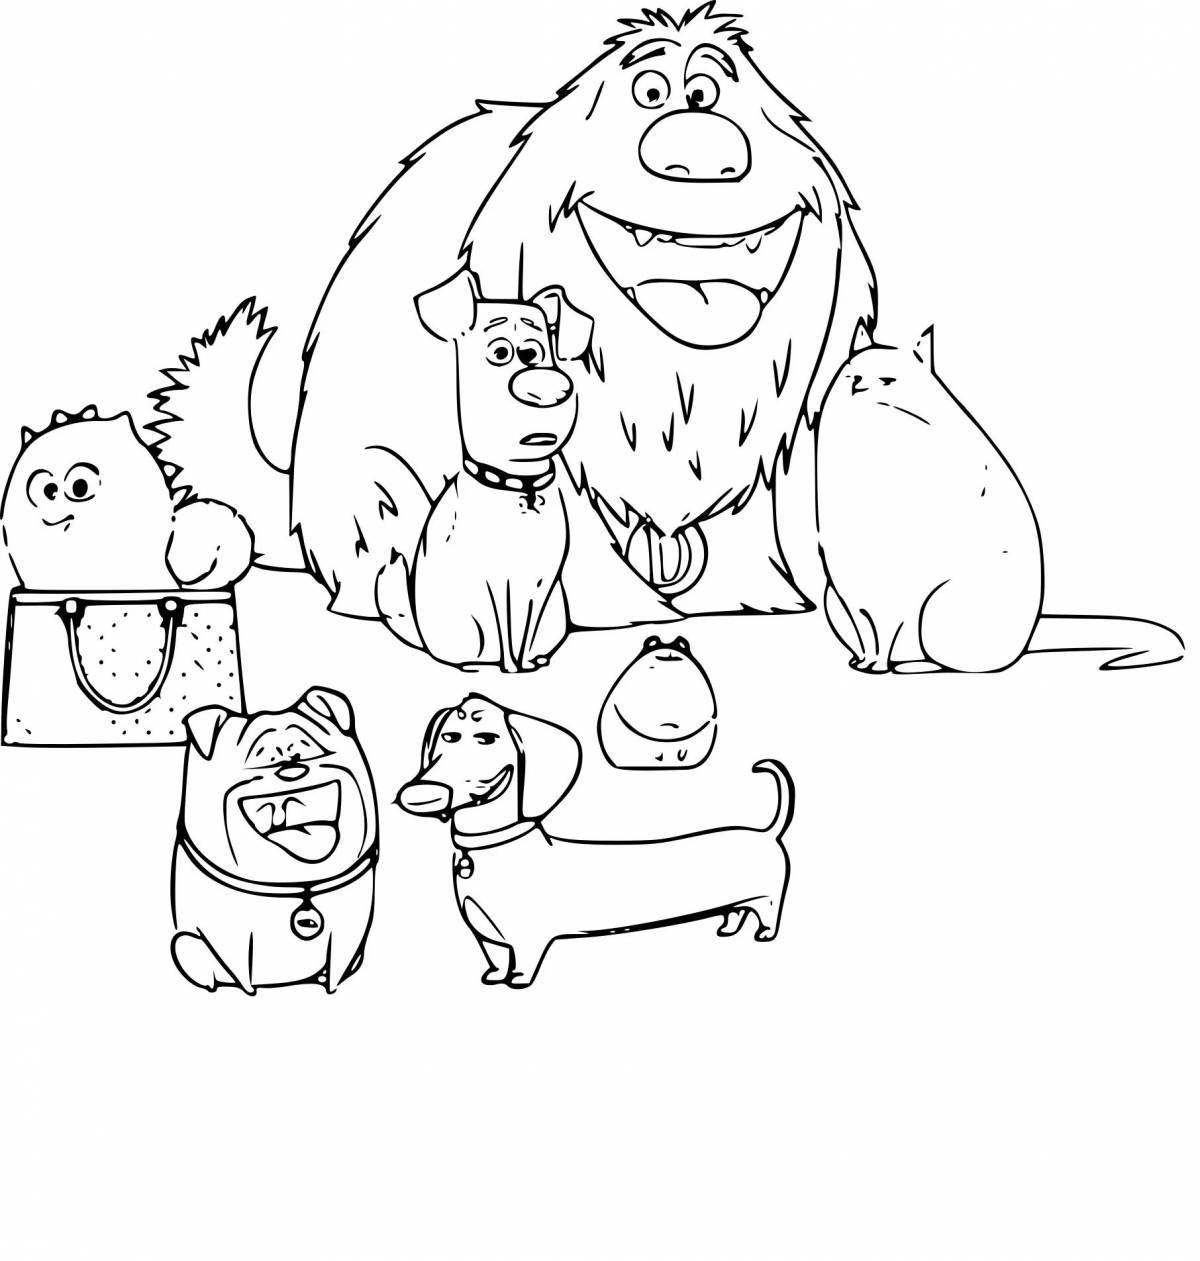 The Secret Life of Pets 2 Wonderful Coloring Book